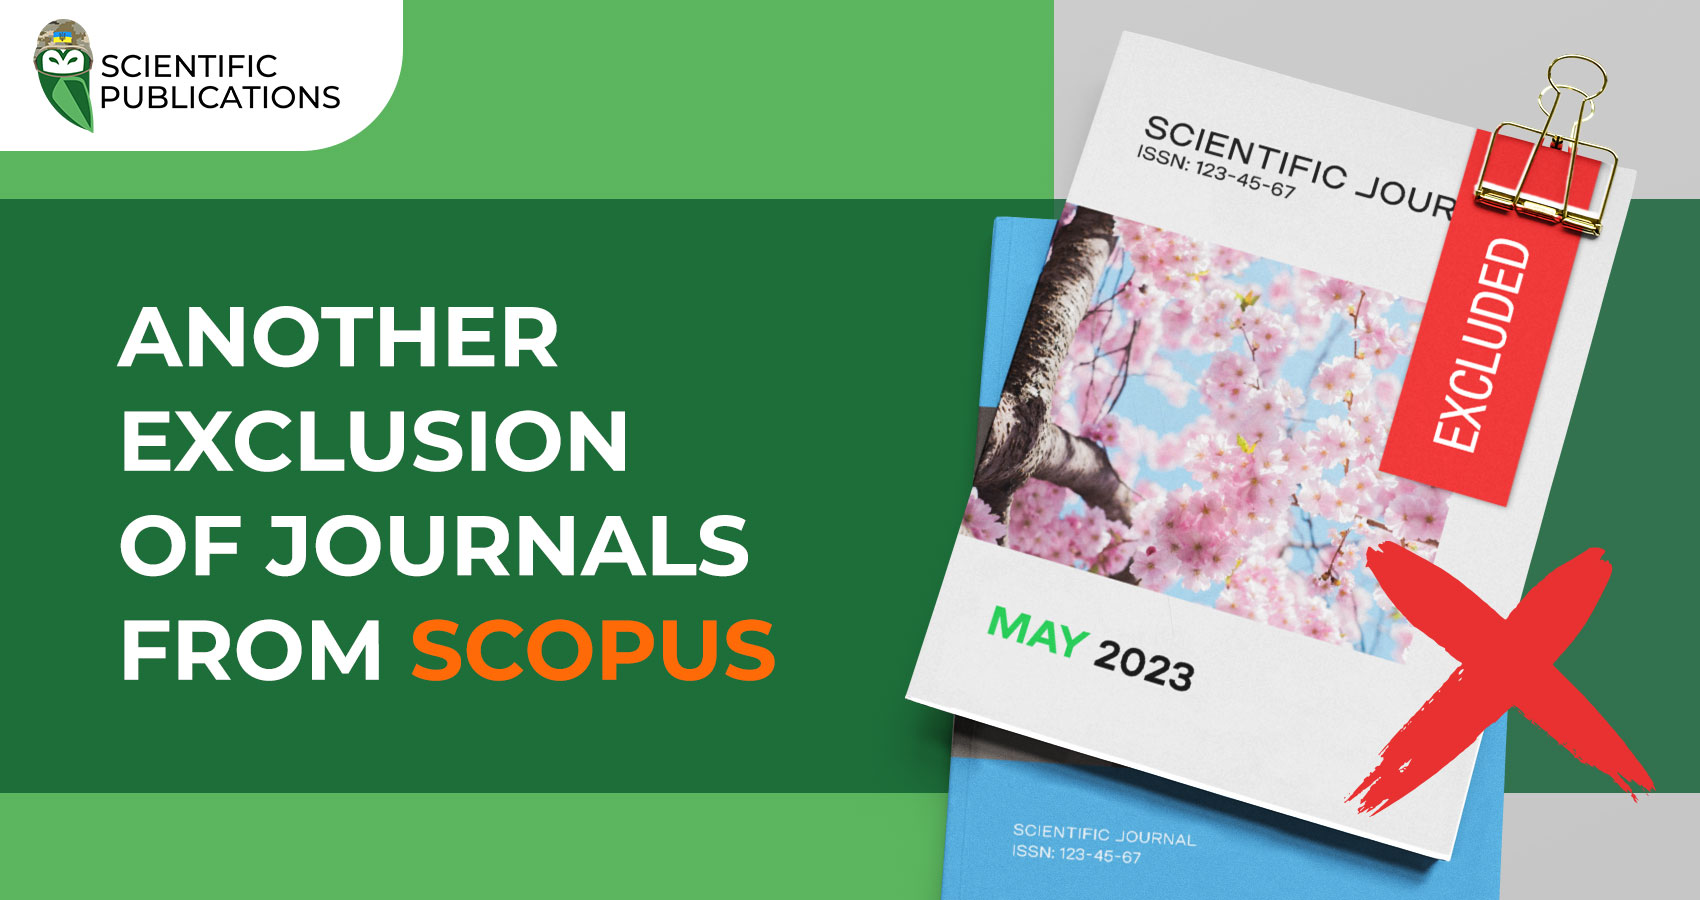 Another exclusion of journals from Scopus (May 2023)